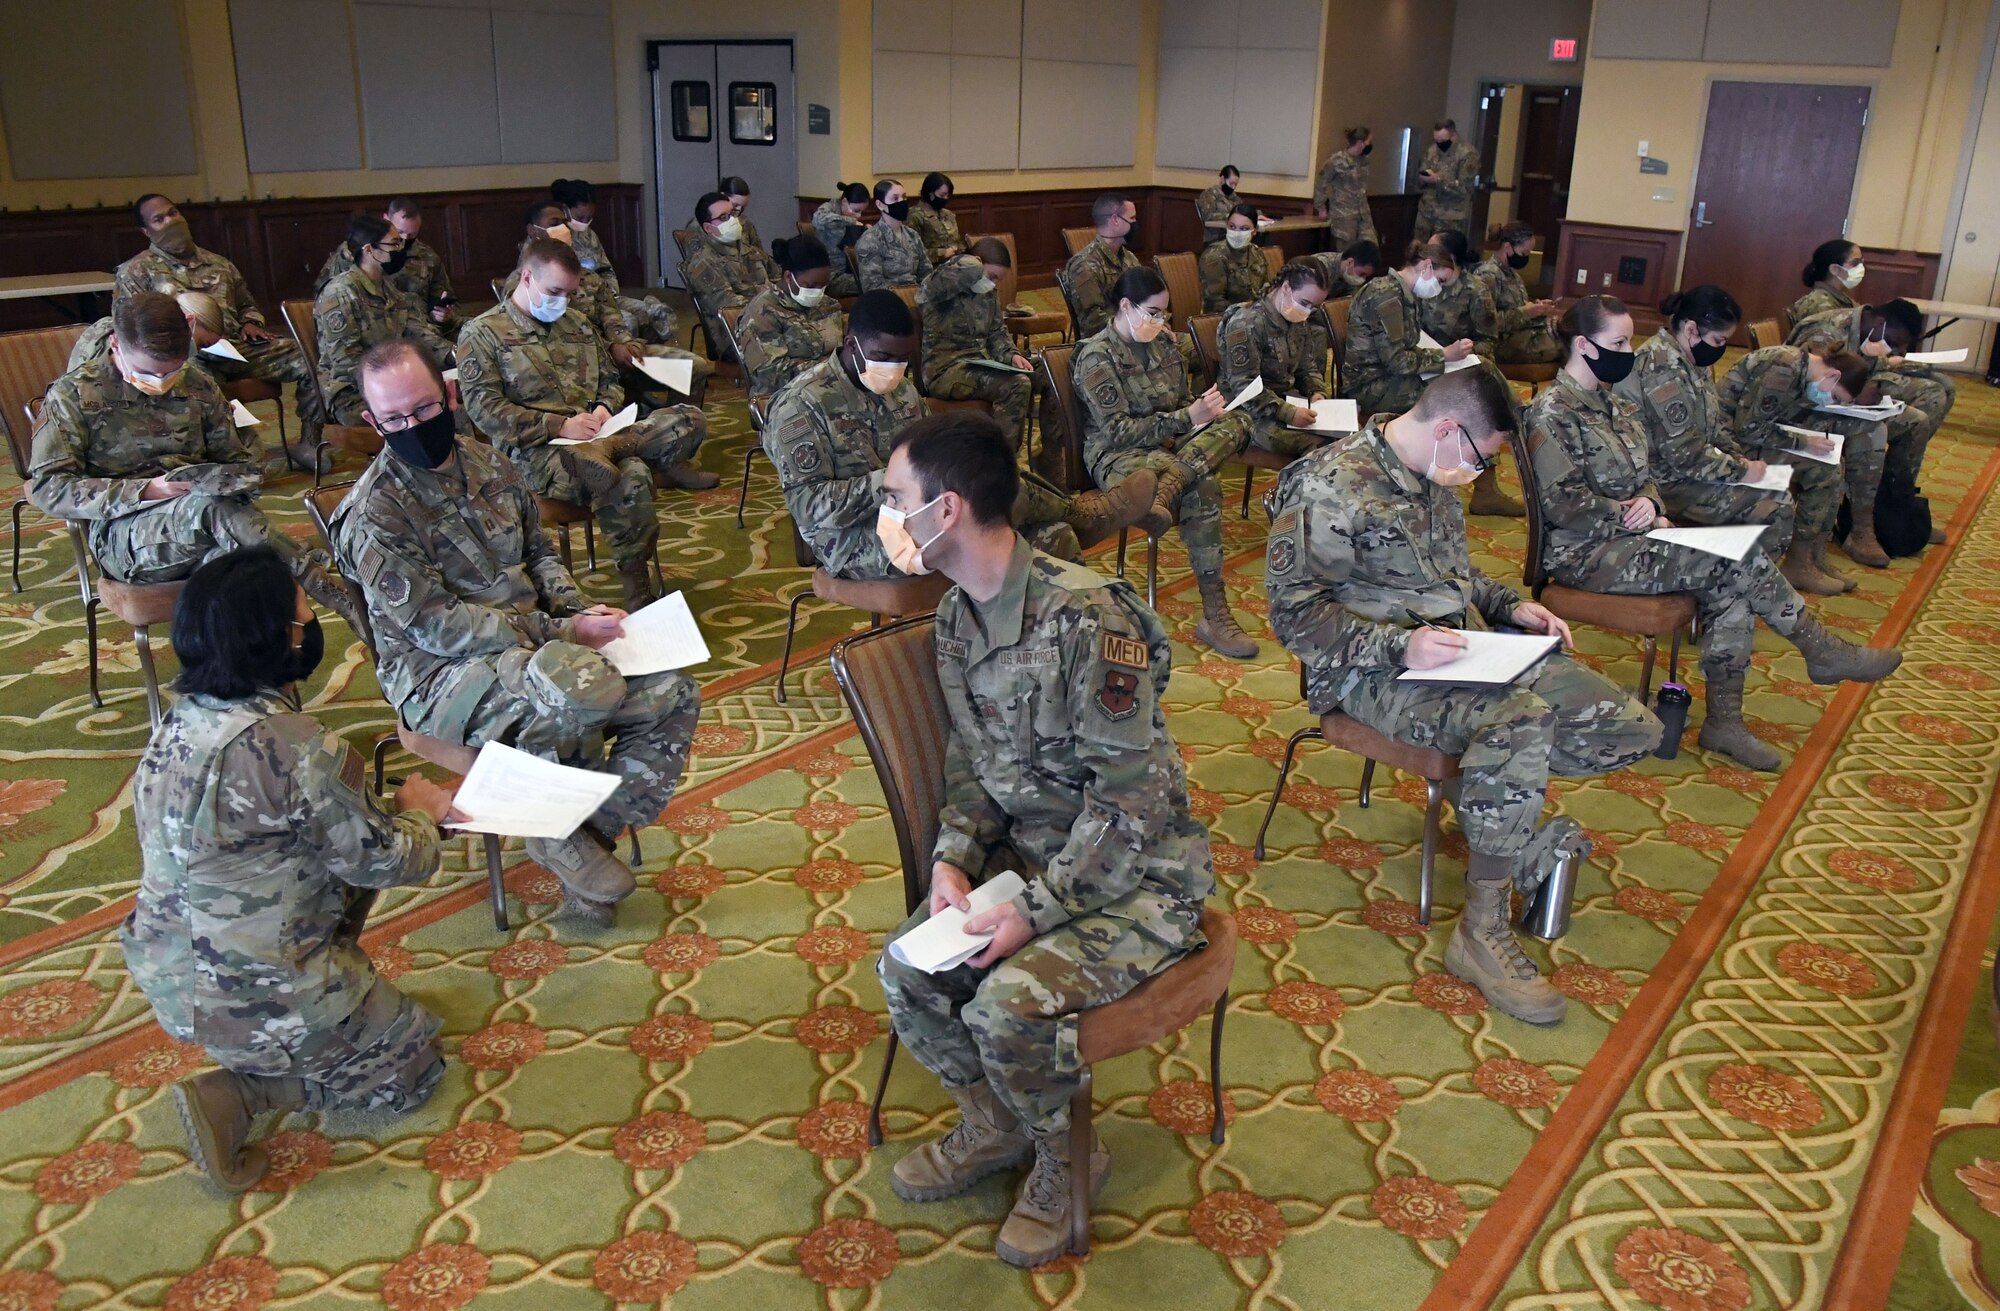 Members of the 81st Medical Group completes inprocessing paper work for deploying inside the Bay Breeze Event Center at Keesler Air Force Base, Mississippi, Feb. 16, 2021. More than 150 Dragon Medics were preparing to deploy to support our nation's COVID-19 vaccine inoculations requirements. (U.S. Air Force photo by Kemberly Groue)